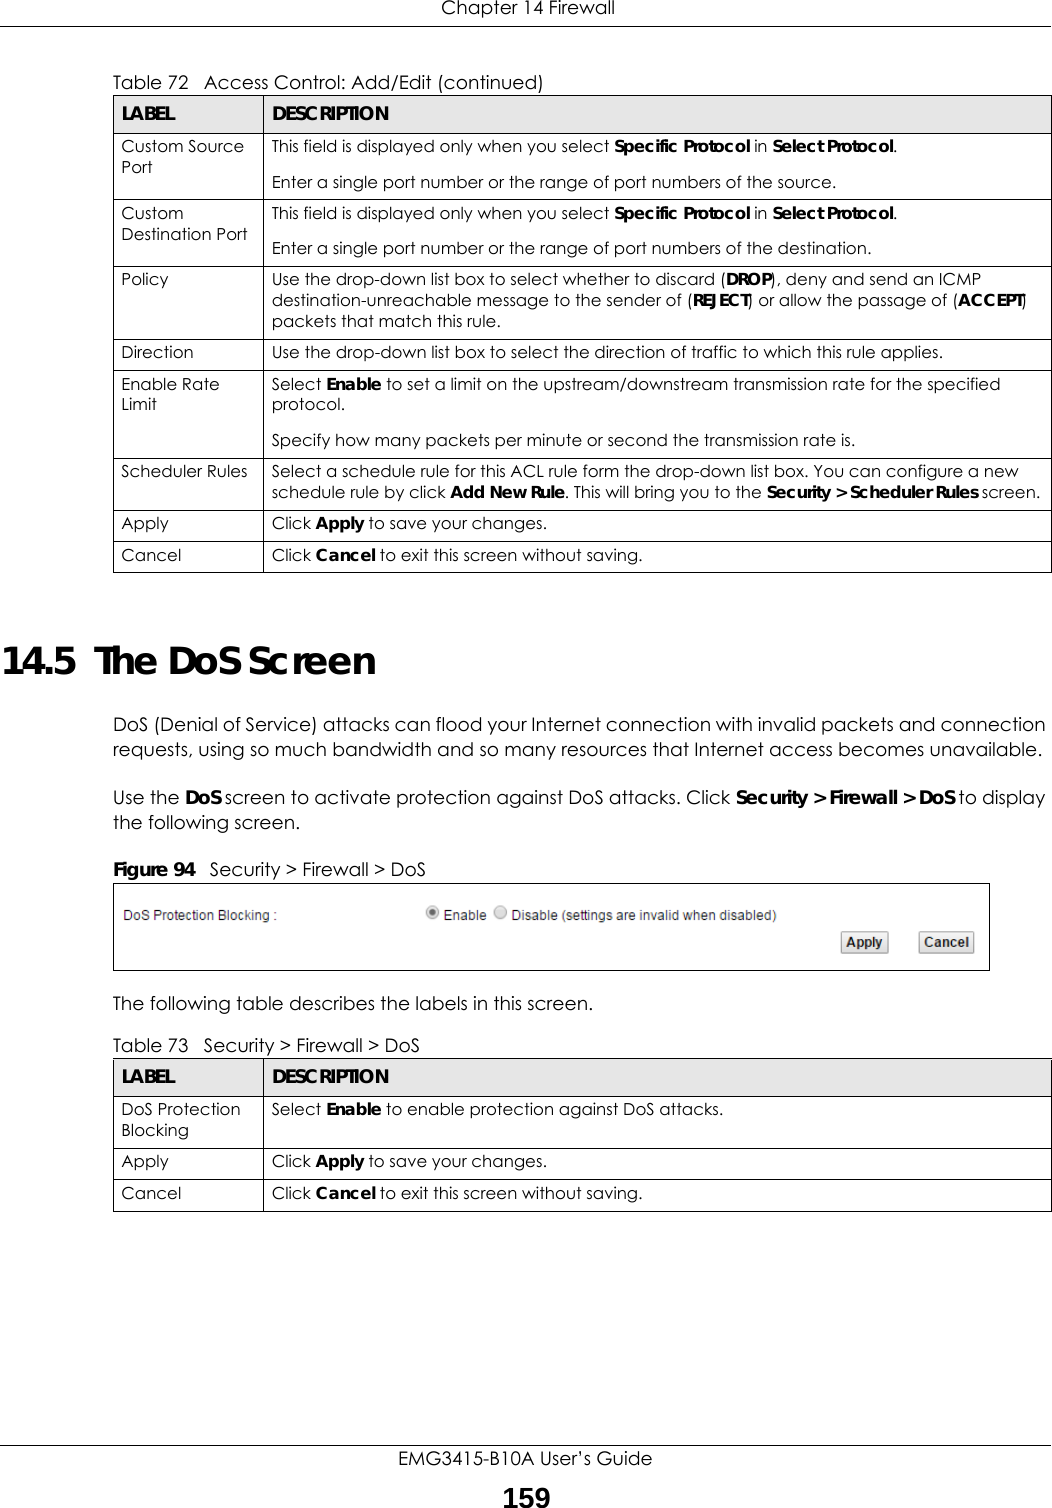  Chapter 14 FirewallEMG3415-B10A User’s Guide15914.5  The DoS ScreenDoS (Denial of Service) attacks can flood your Internet connection with invalid packets and connection requests, using so much bandwidth and so many resources that Internet access becomes unavailable. Use the DoS screen to activate protection against DoS attacks. Click Security &gt; Firewall &gt; DoS to display the following screen. Figure 94   Security &gt; Firewall &gt; DoSThe following table describes the labels in this screen. Custom Source PortThis field is displayed only when you select Specific Protocol in Select Protocol.Enter a single port number or the range of port numbers of the source.Custom Destination PortThis field is displayed only when you select Specific Protocol in Select Protocol.Enter a single port number or the range of port numbers of the destination.Policy Use the drop-down list box to select whether to discard (DROP), deny and send an ICMP destination-unreachable message to the sender of (REJECT) or allow the passage of (ACCEPT) packets that match this rule.Direction  Use the drop-down list box to select the direction of traffic to which this rule applies.Enable Rate LimitSelect Enable to set a limit on the upstream/downstream transmission rate for the specified protocol.Specify how many packets per minute or second the transmission rate is.Scheduler Rules Select a schedule rule for this ACL rule form the drop-down list box. You can configure a new schedule rule by click Add New Rule. This will bring you to the Security &gt; Scheduler Rules screen.Apply Click Apply to save your changes.Cancel Click Cancel to exit this screen without saving.Table 72   Access Control: Add/Edit (continued)LABEL DESCRIPTIONTable 73   Security &gt; Firewall &gt; DoSLABEL DESCRIPTIONDoS Protection BlockingSelect Enable to enable protection against DoS attacks.Apply Click Apply to save your changes.Cancel Click Cancel to exit this screen without saving.